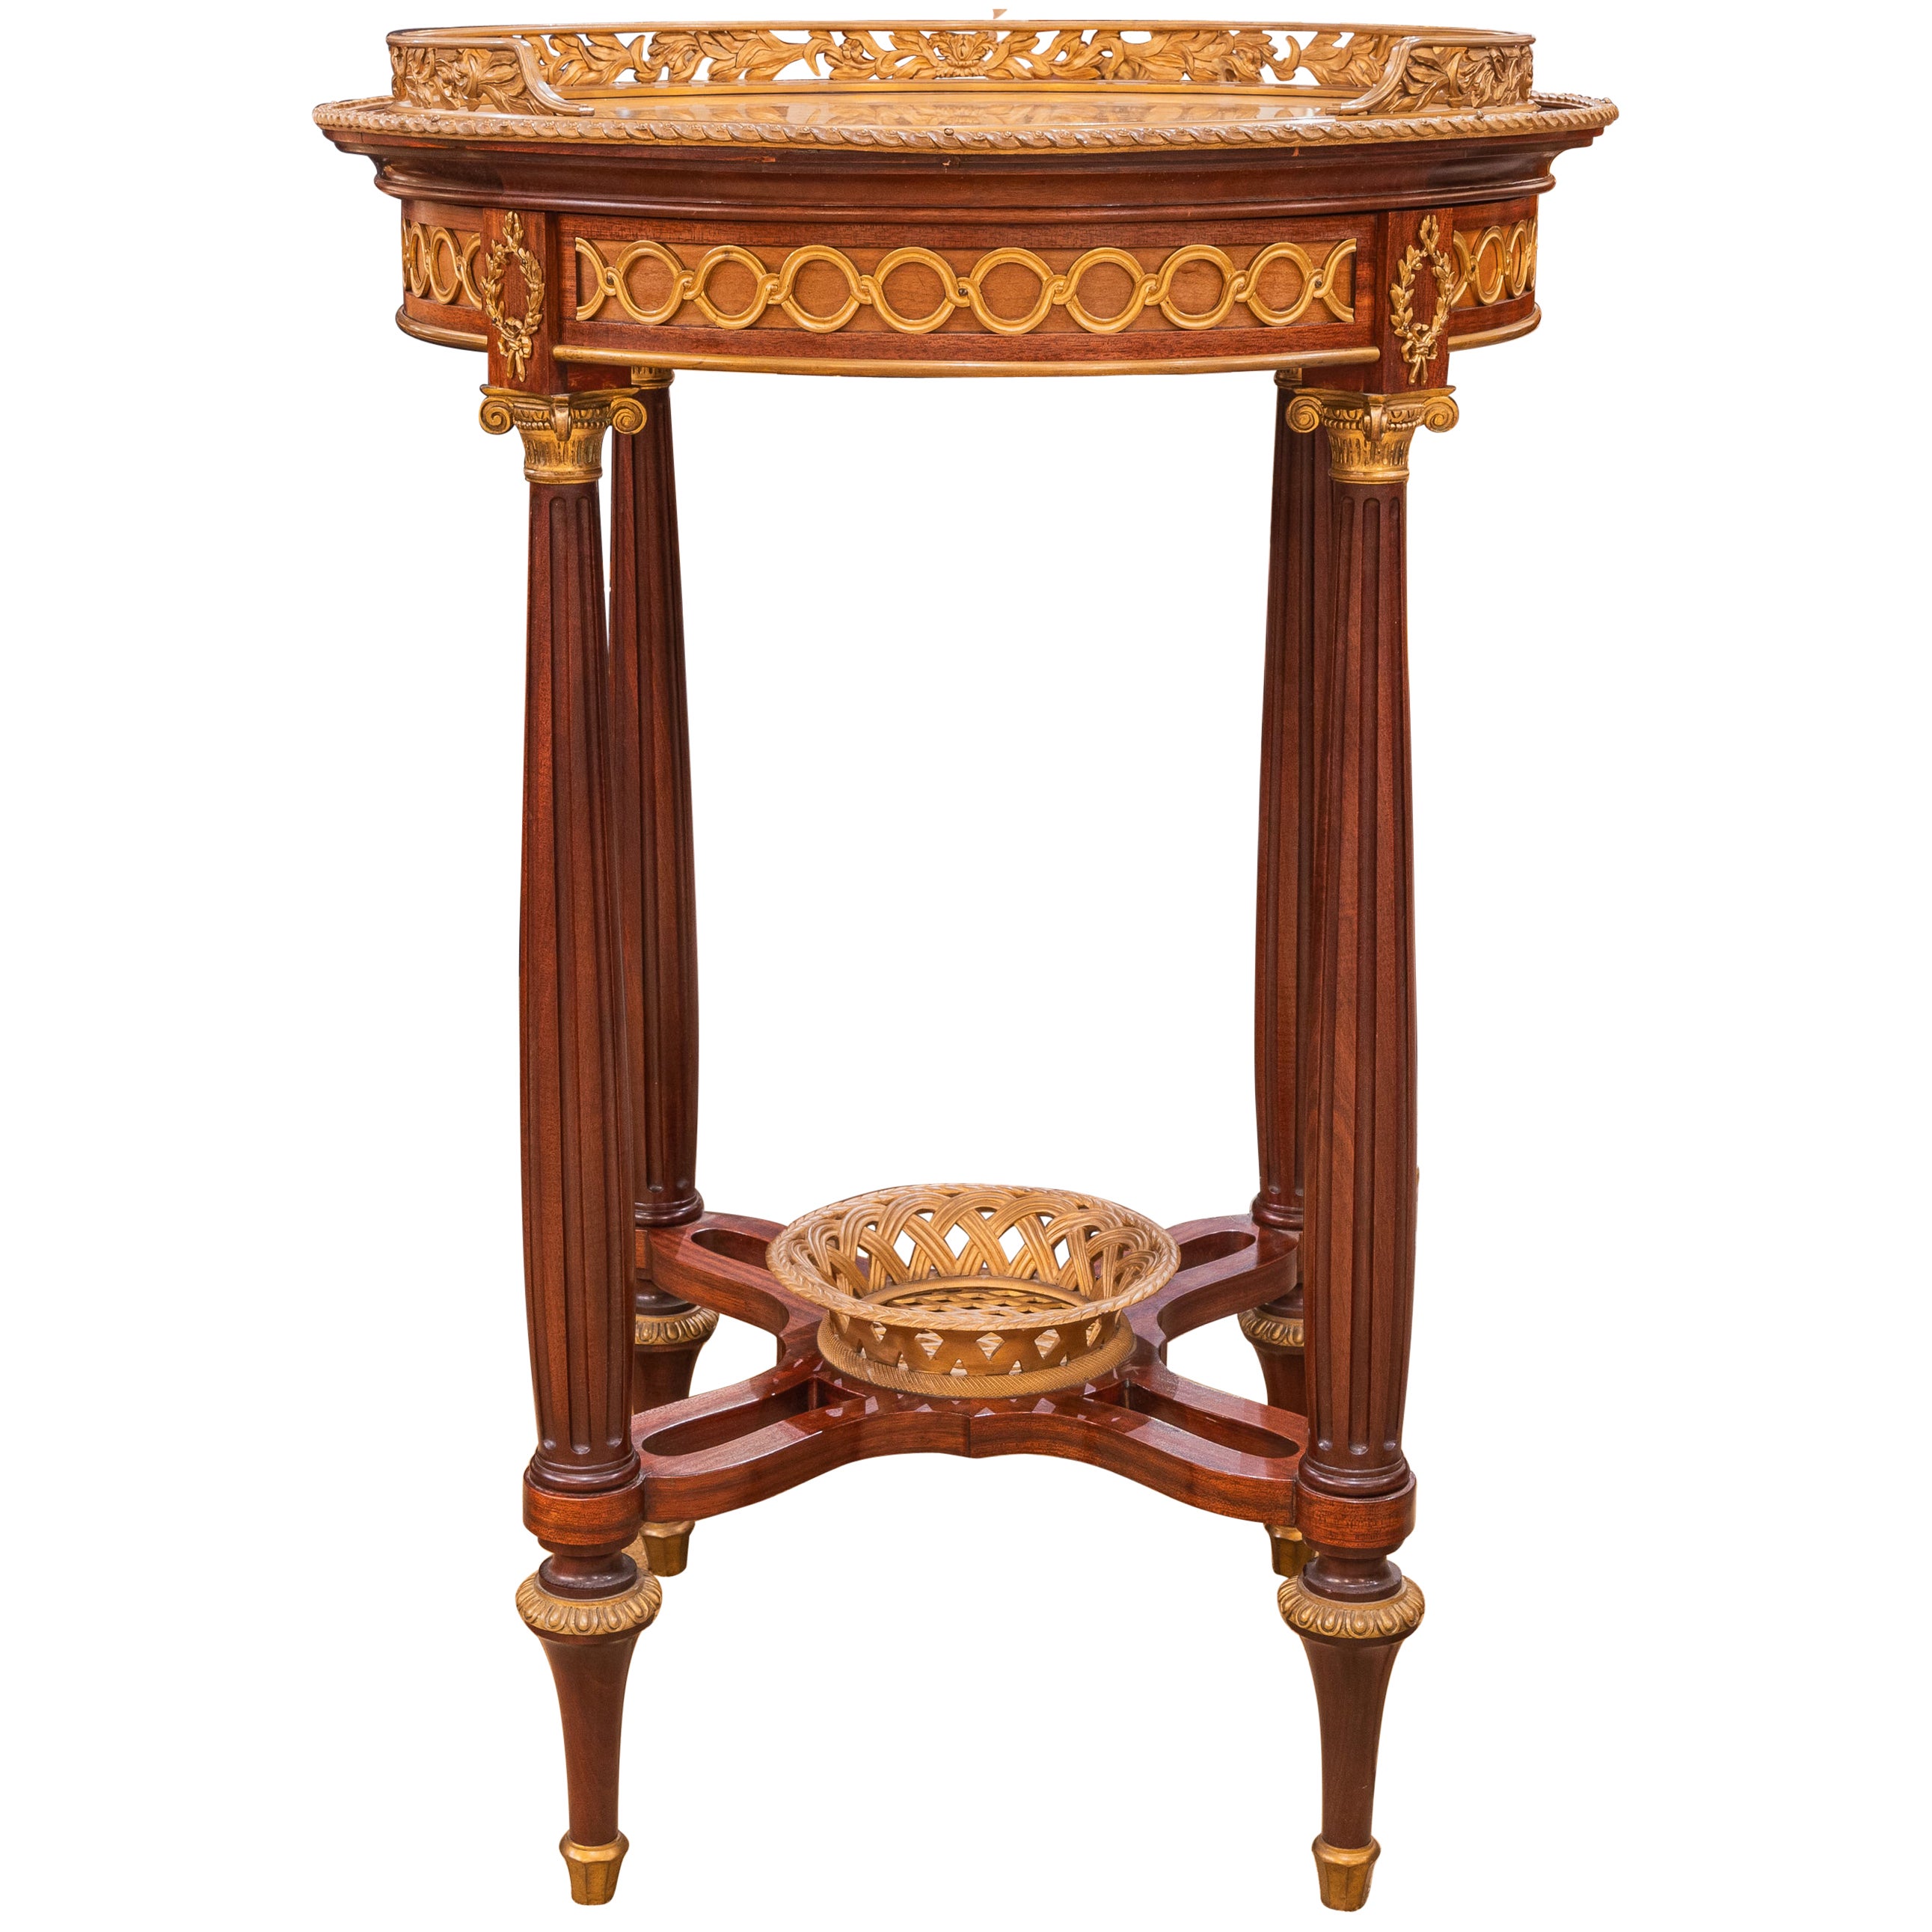 A fine 19th century French Louis XVI mahogany and gilt bronze mounted gueridon For Sale